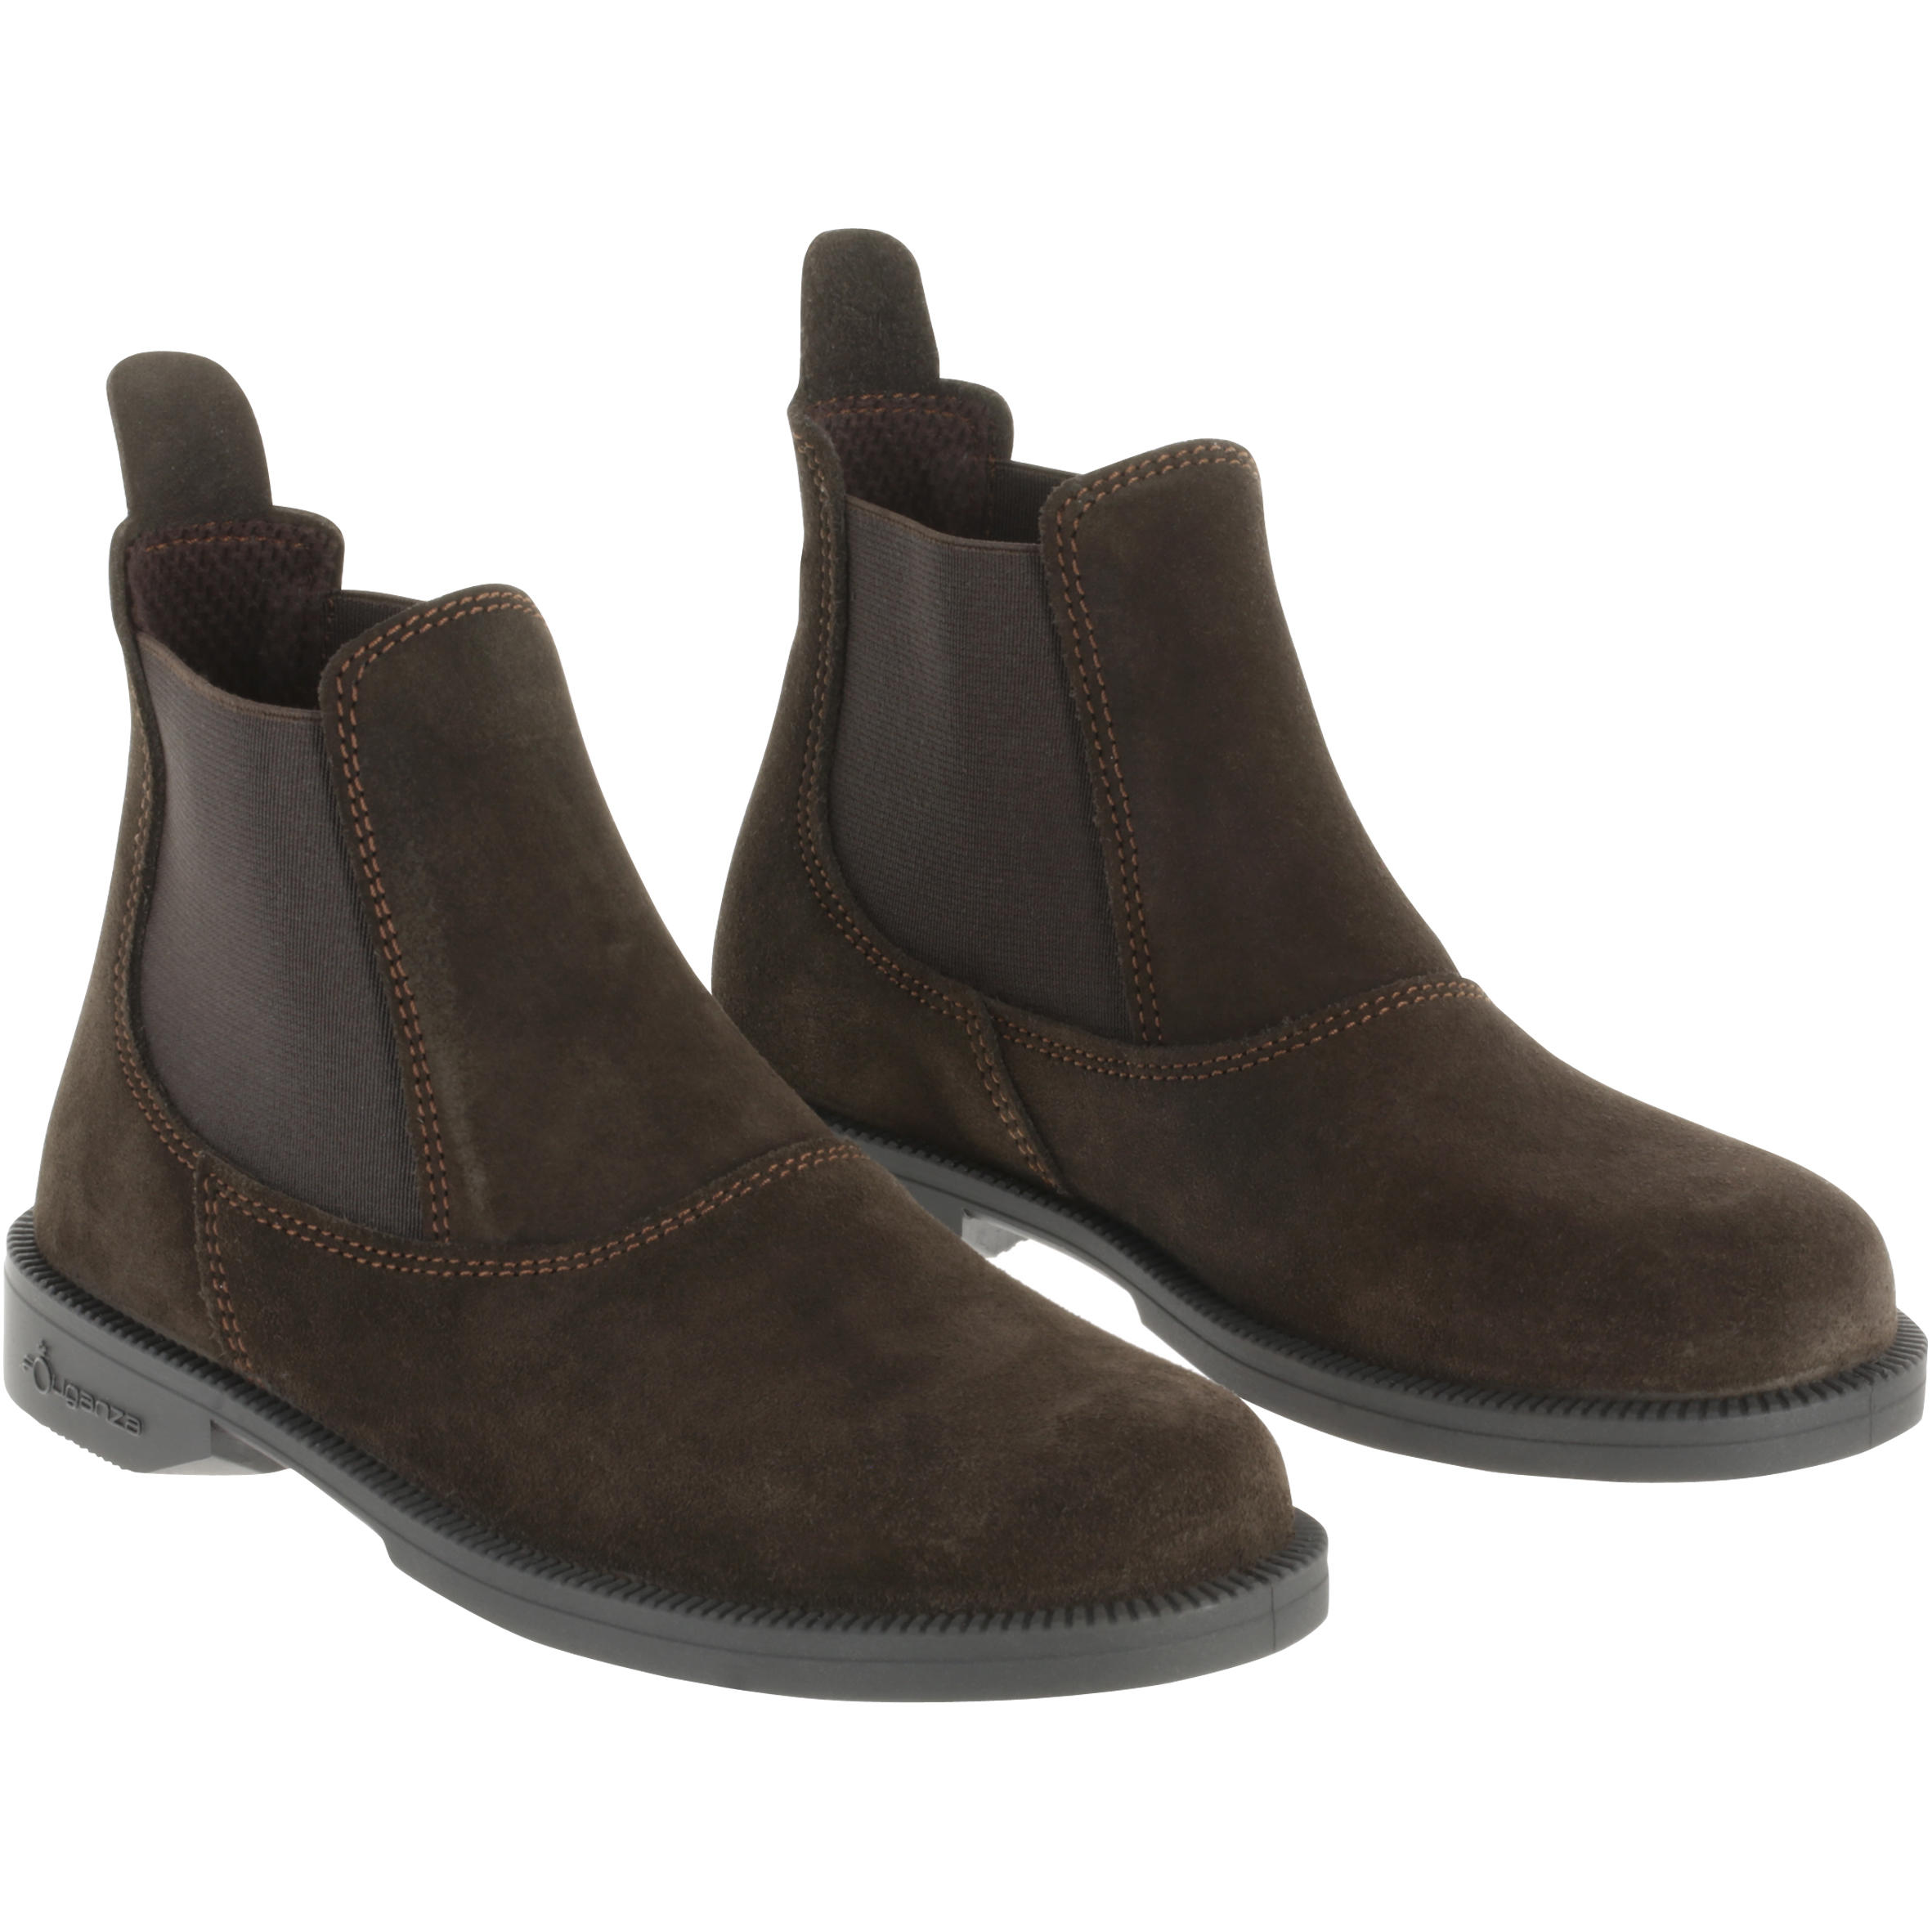 Kids' Horse Riding Leather Jodhpur Boots Classic - Brown 7/13